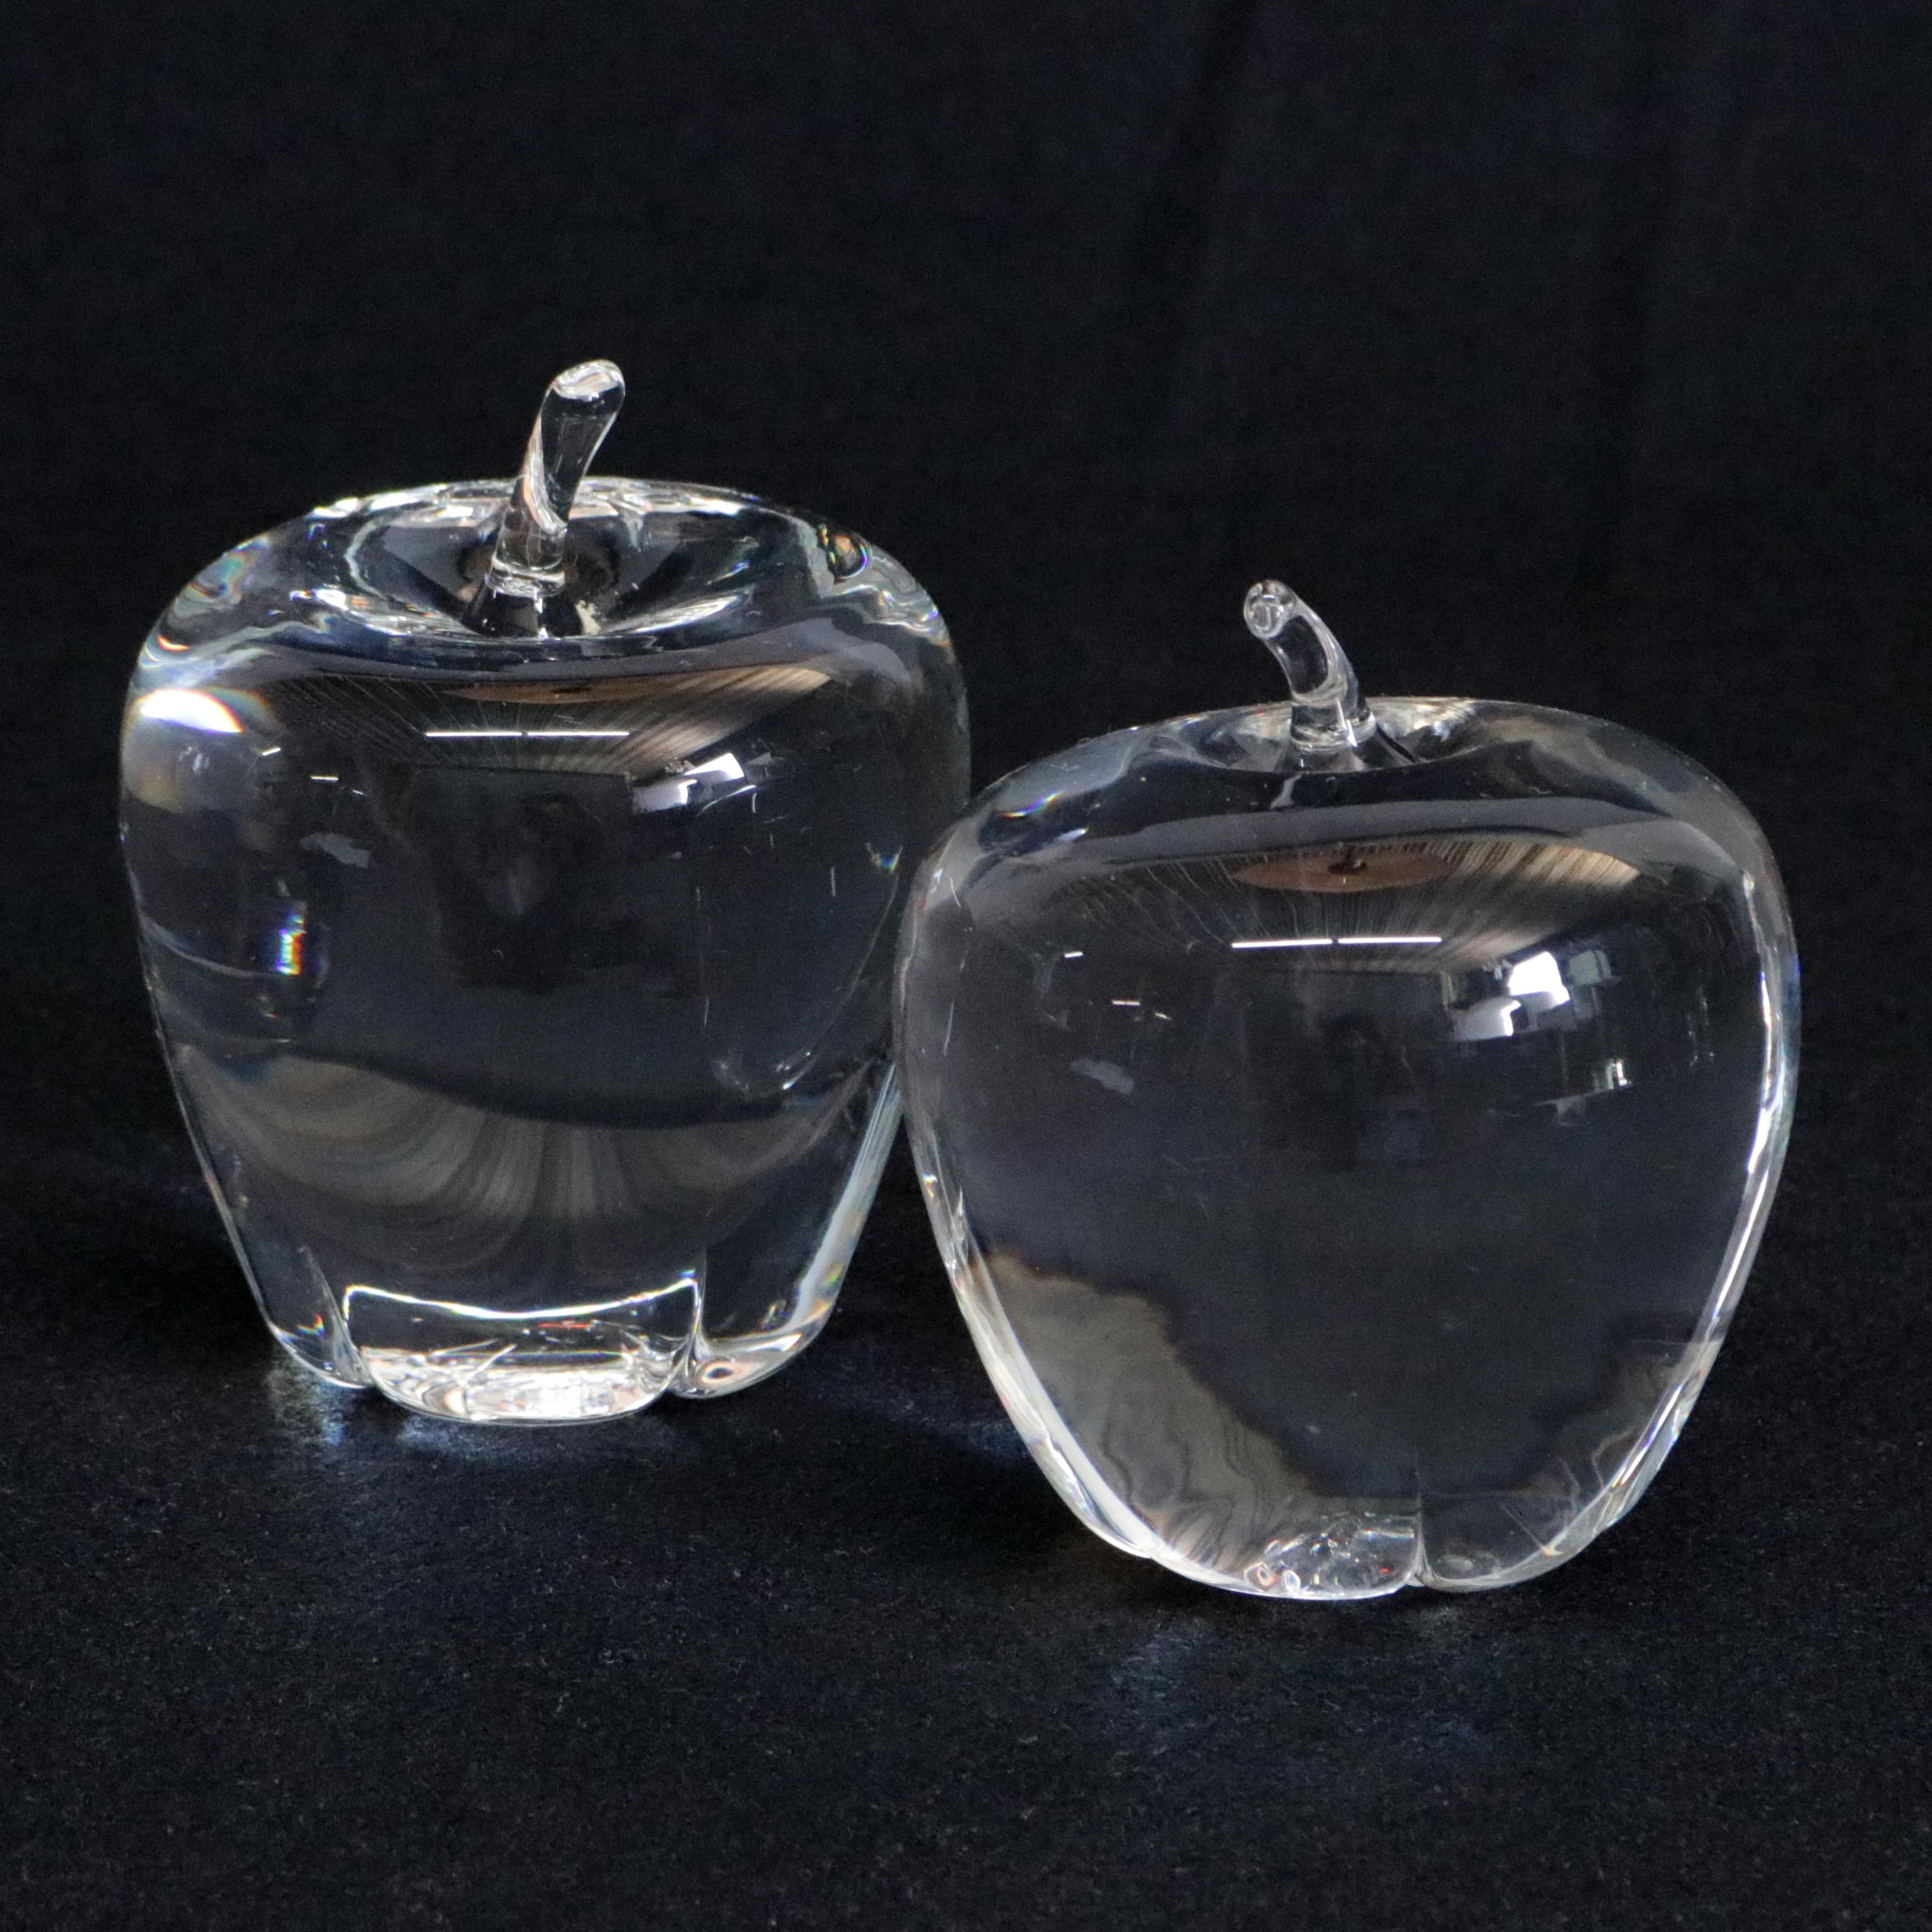 Two Midcentury Steuben figurative mouth blown crystal fruit sculptural paperweights features colorless art glass in full body form of Apples designed in the 1940's by Corning Museum of Glass, New York, NY, signed on base, 20th century
Large